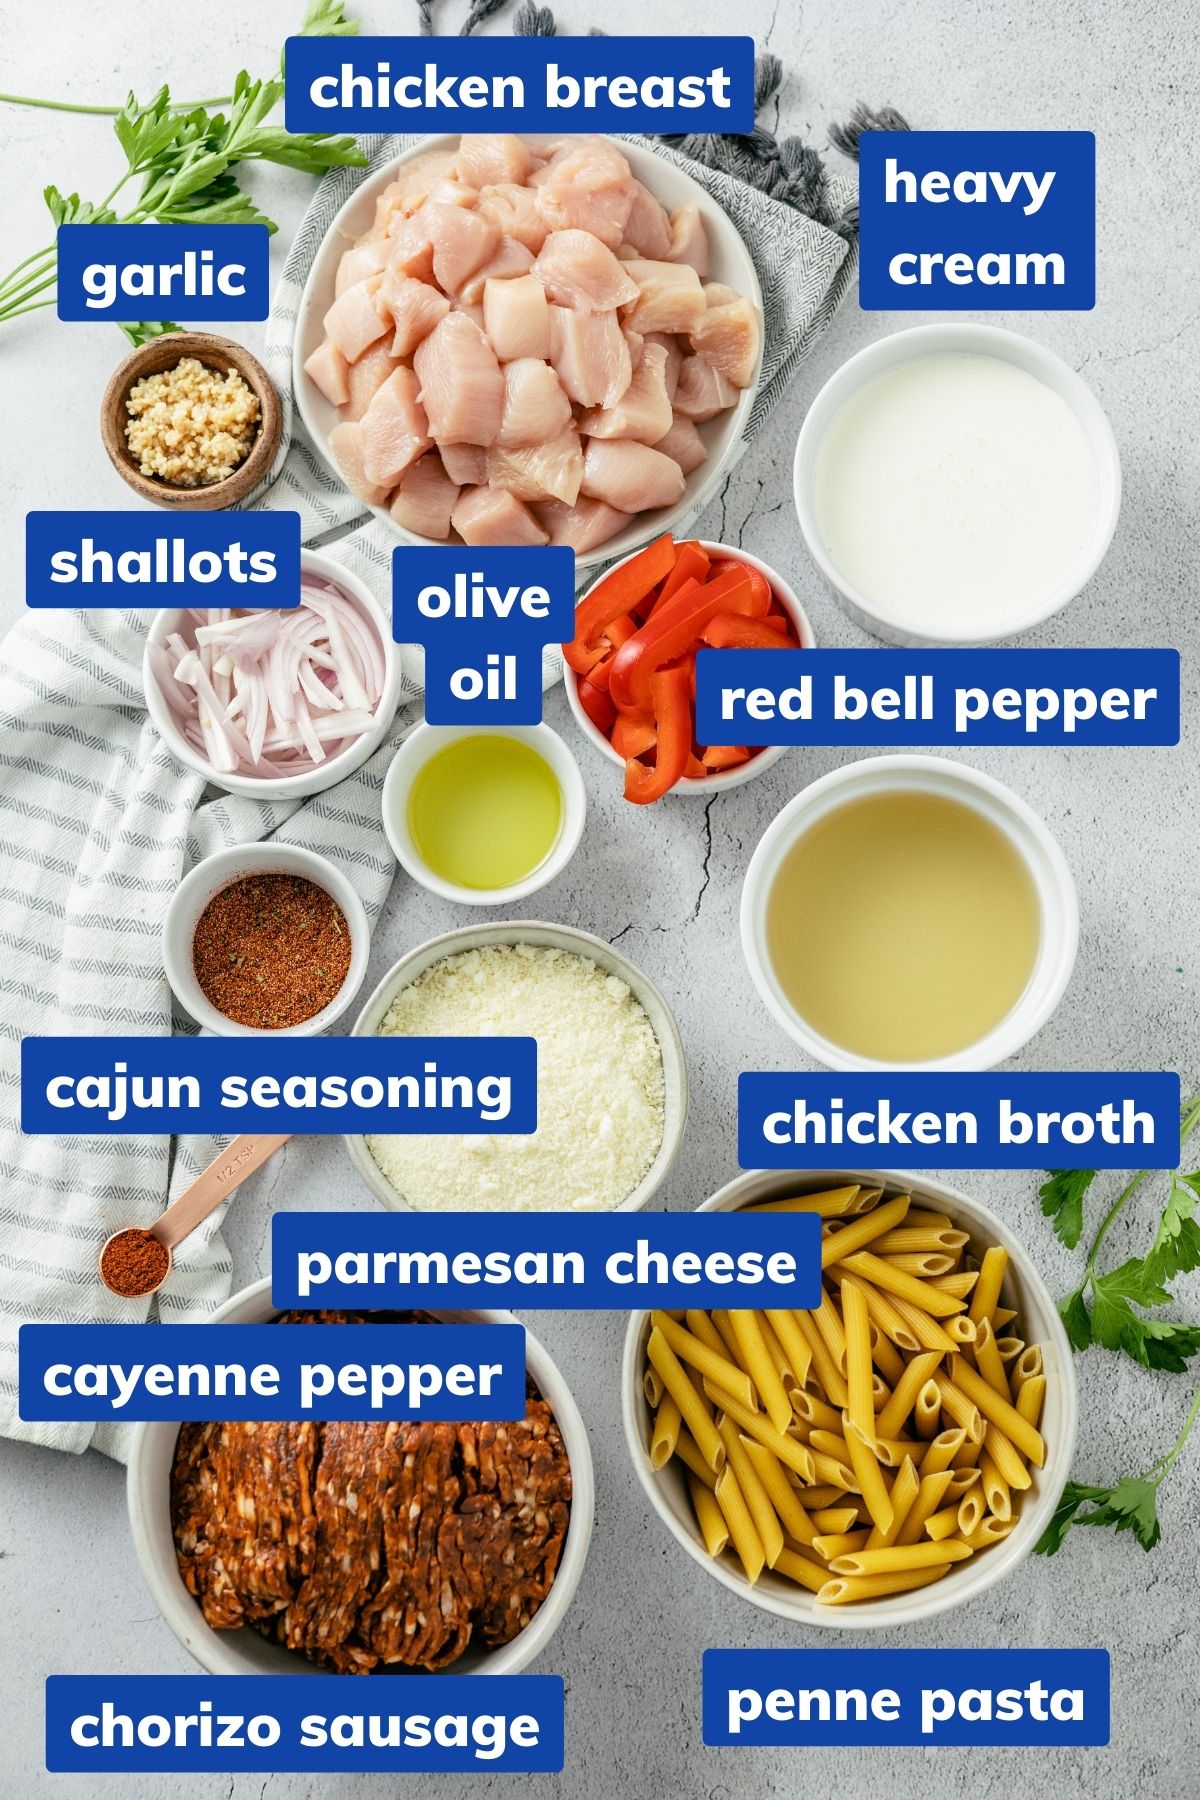 ingredients needed to make cajun chicken and chorizo pasta: chicken breast, cajun seasoning, olive oil, chorizo sausage, garlic cloves, shallots, red bell pepper, chicken broth, heavy cream, parmesan cheese, cayenne pepper, penne pasta, cooked